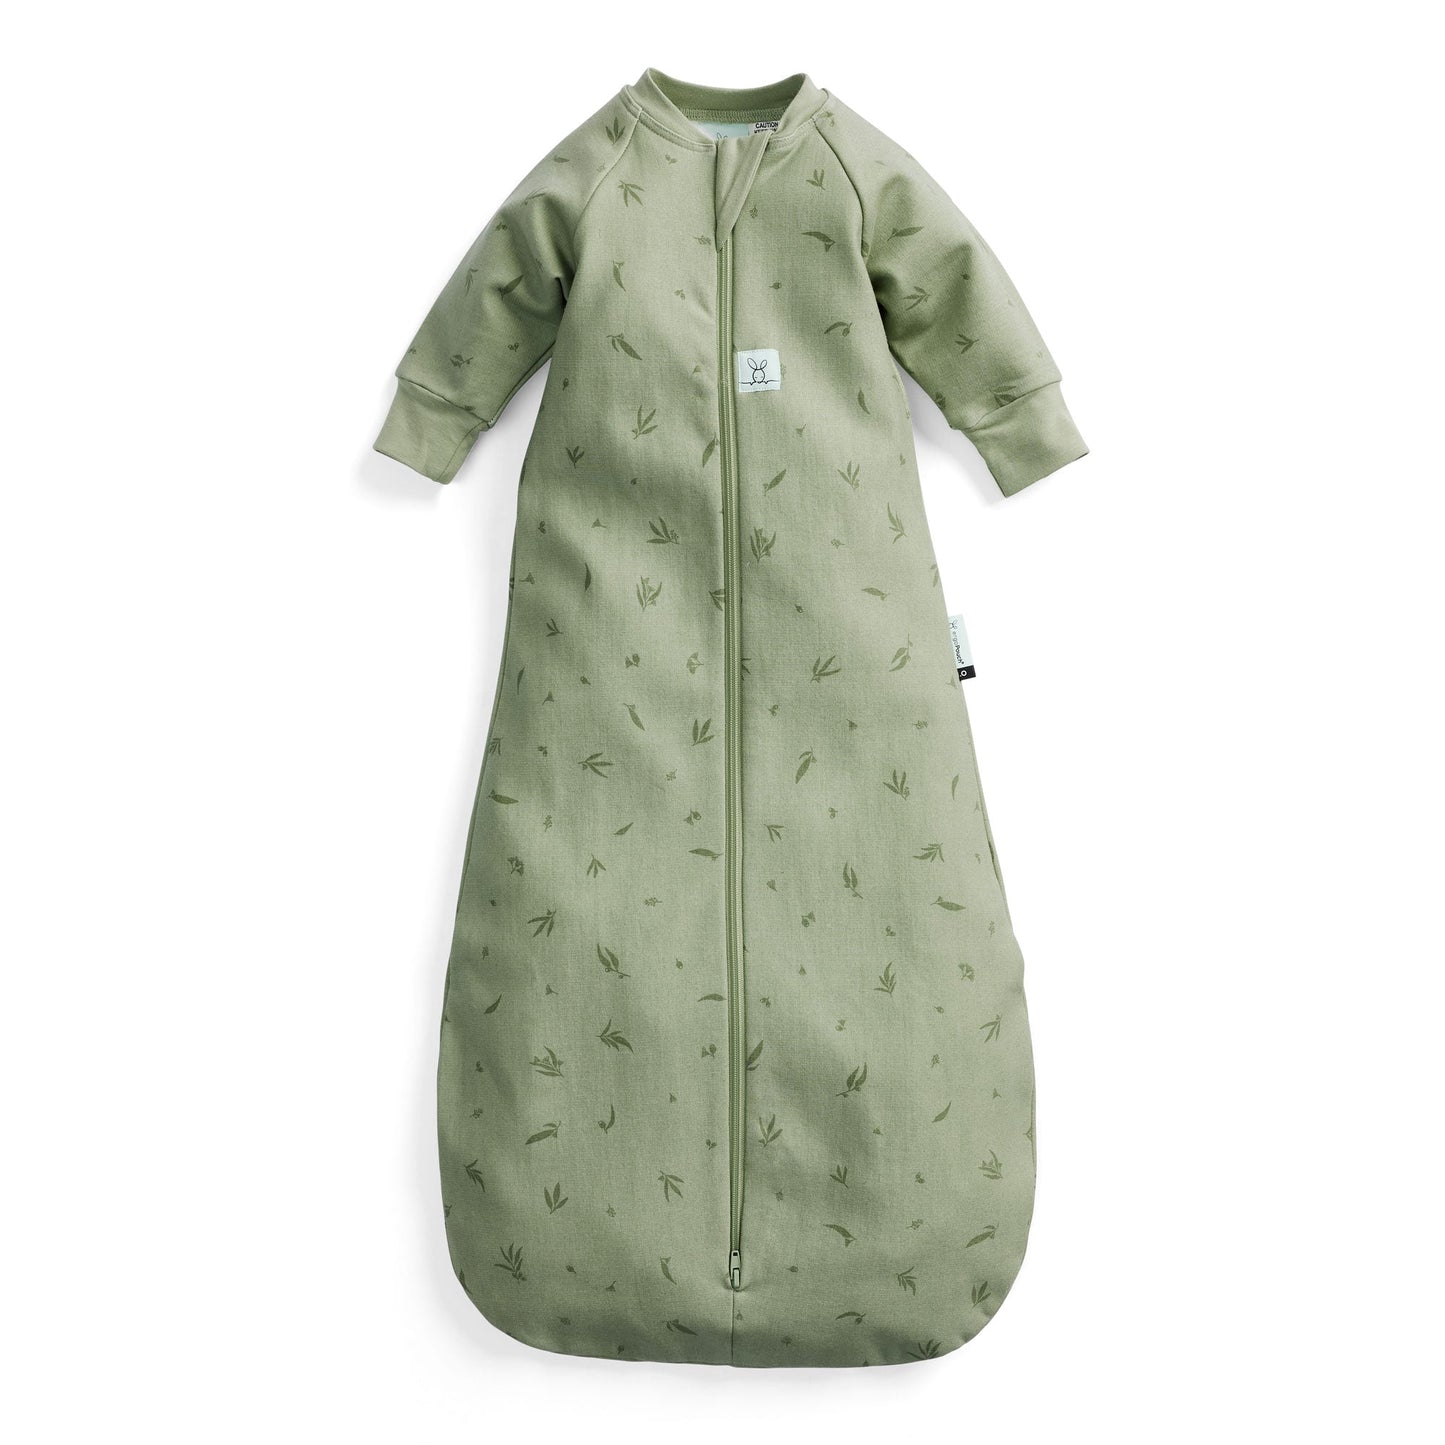 Jersey Sleeping Bag Sleeved 3.5 Tog, Willow- 8-24 months